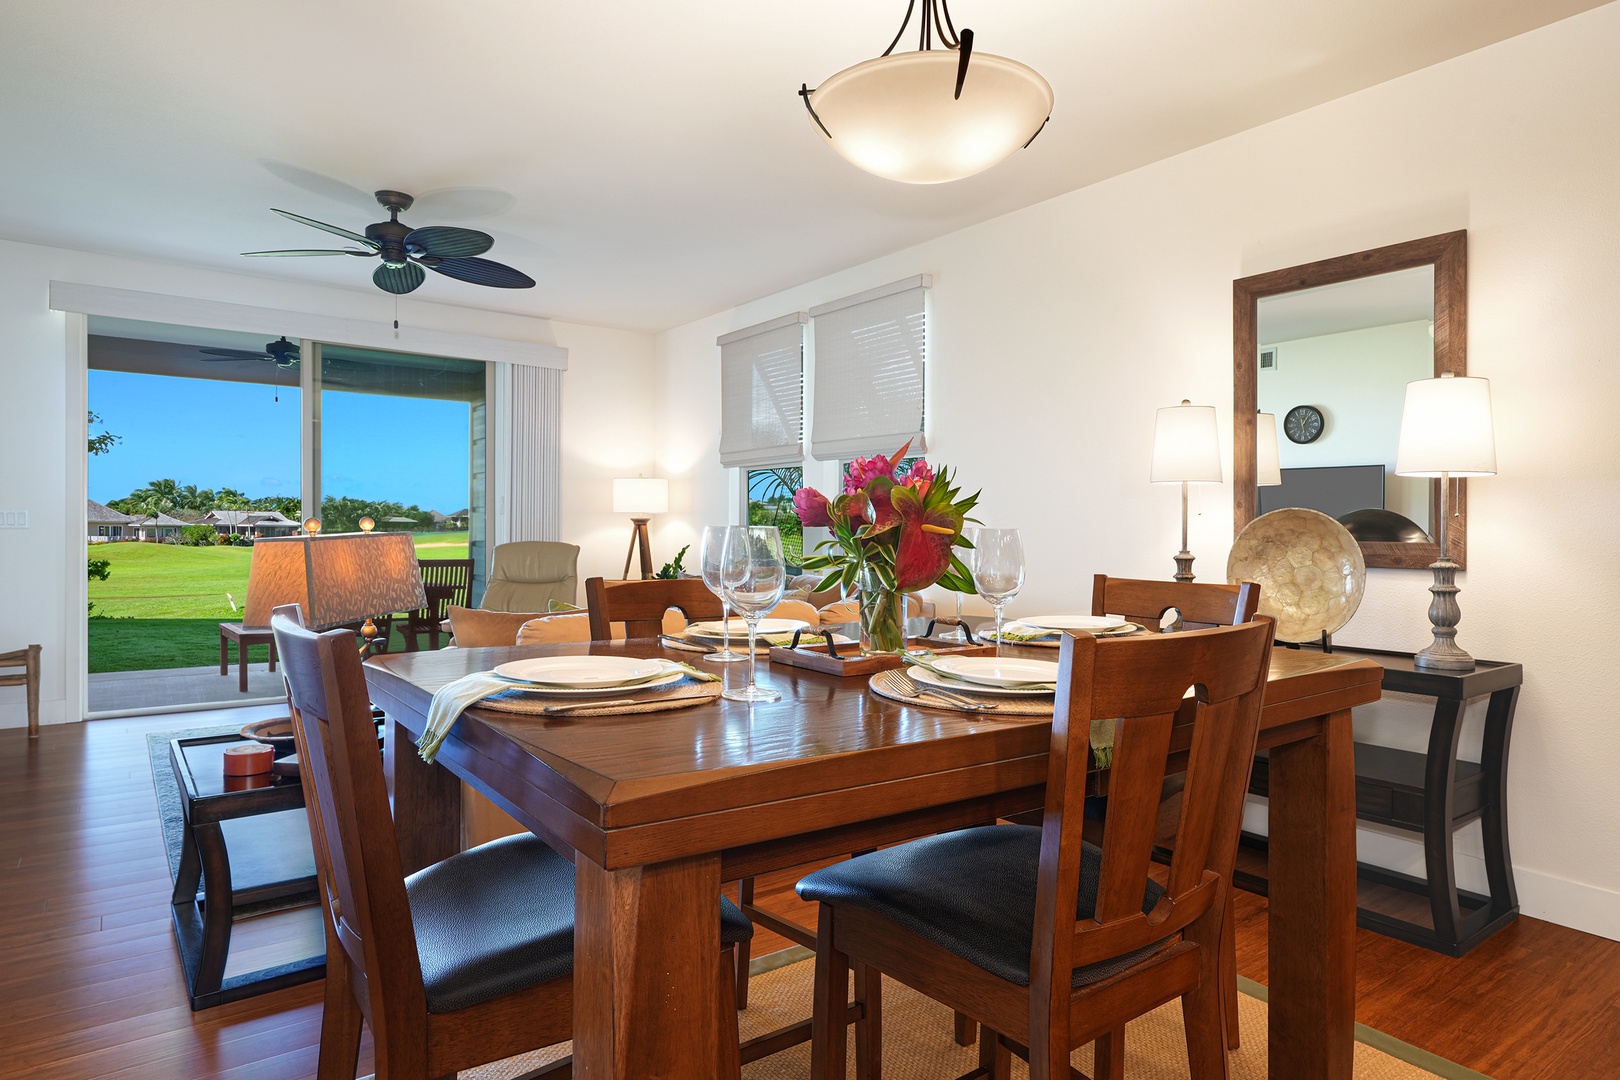 Koloa Vacation Rentals, Pili Mai 7J - Dining room with seating for six, with views through the sliding doors.